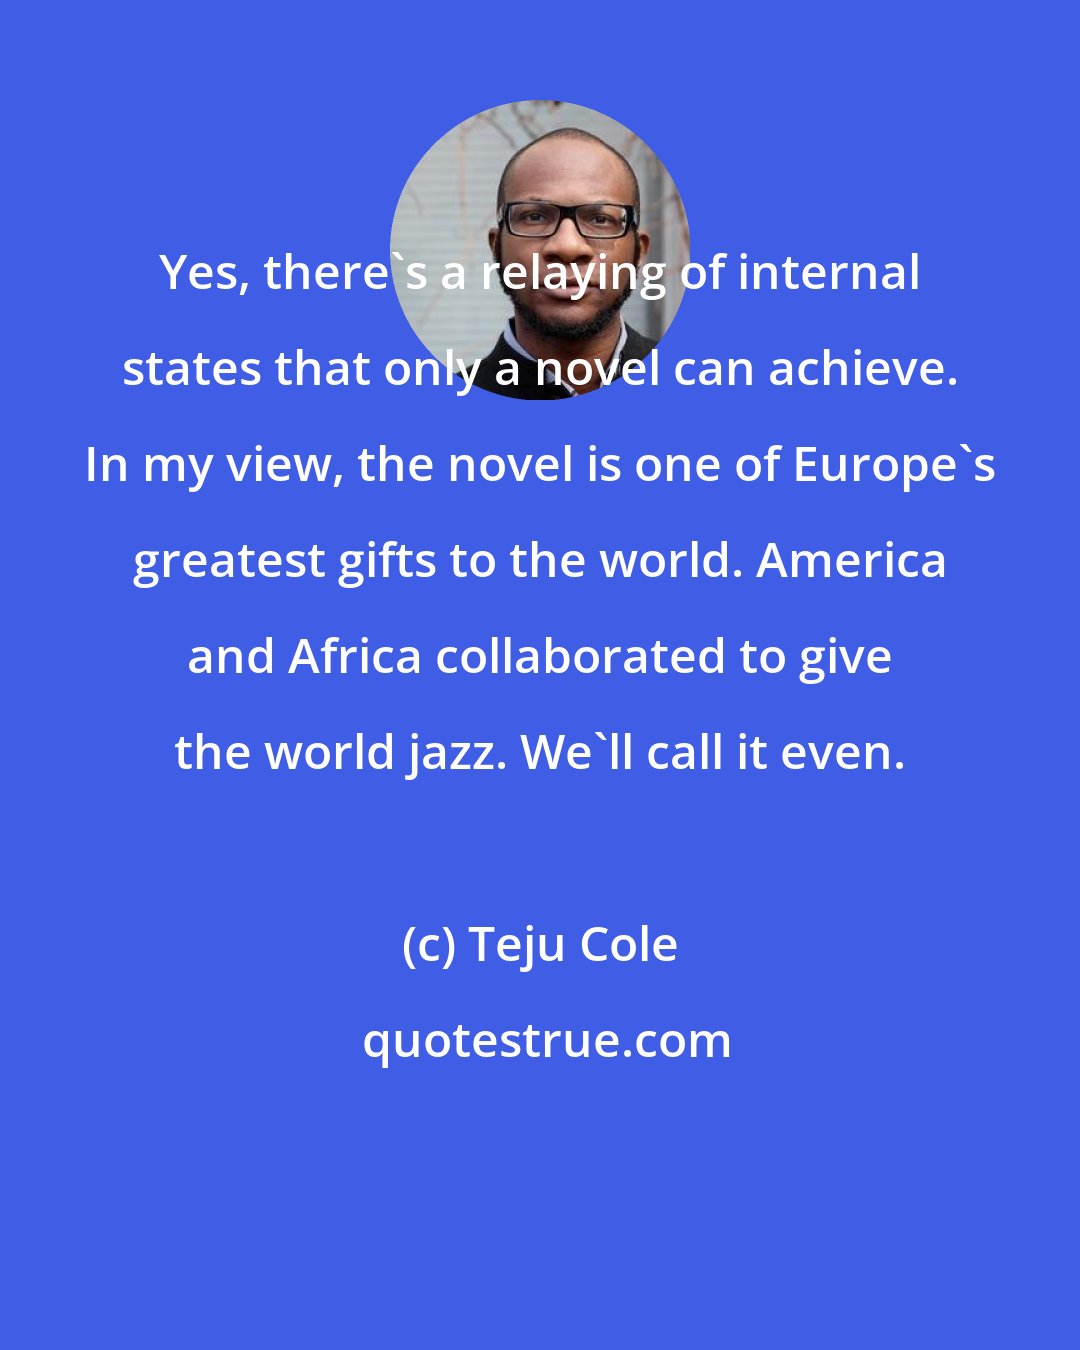 Teju Cole: Yes, there's a relaying of internal states that only a novel can achieve. In my view, the novel is one of Europe's greatest gifts to the world. America and Africa collaborated to give the world jazz. We'll call it even.